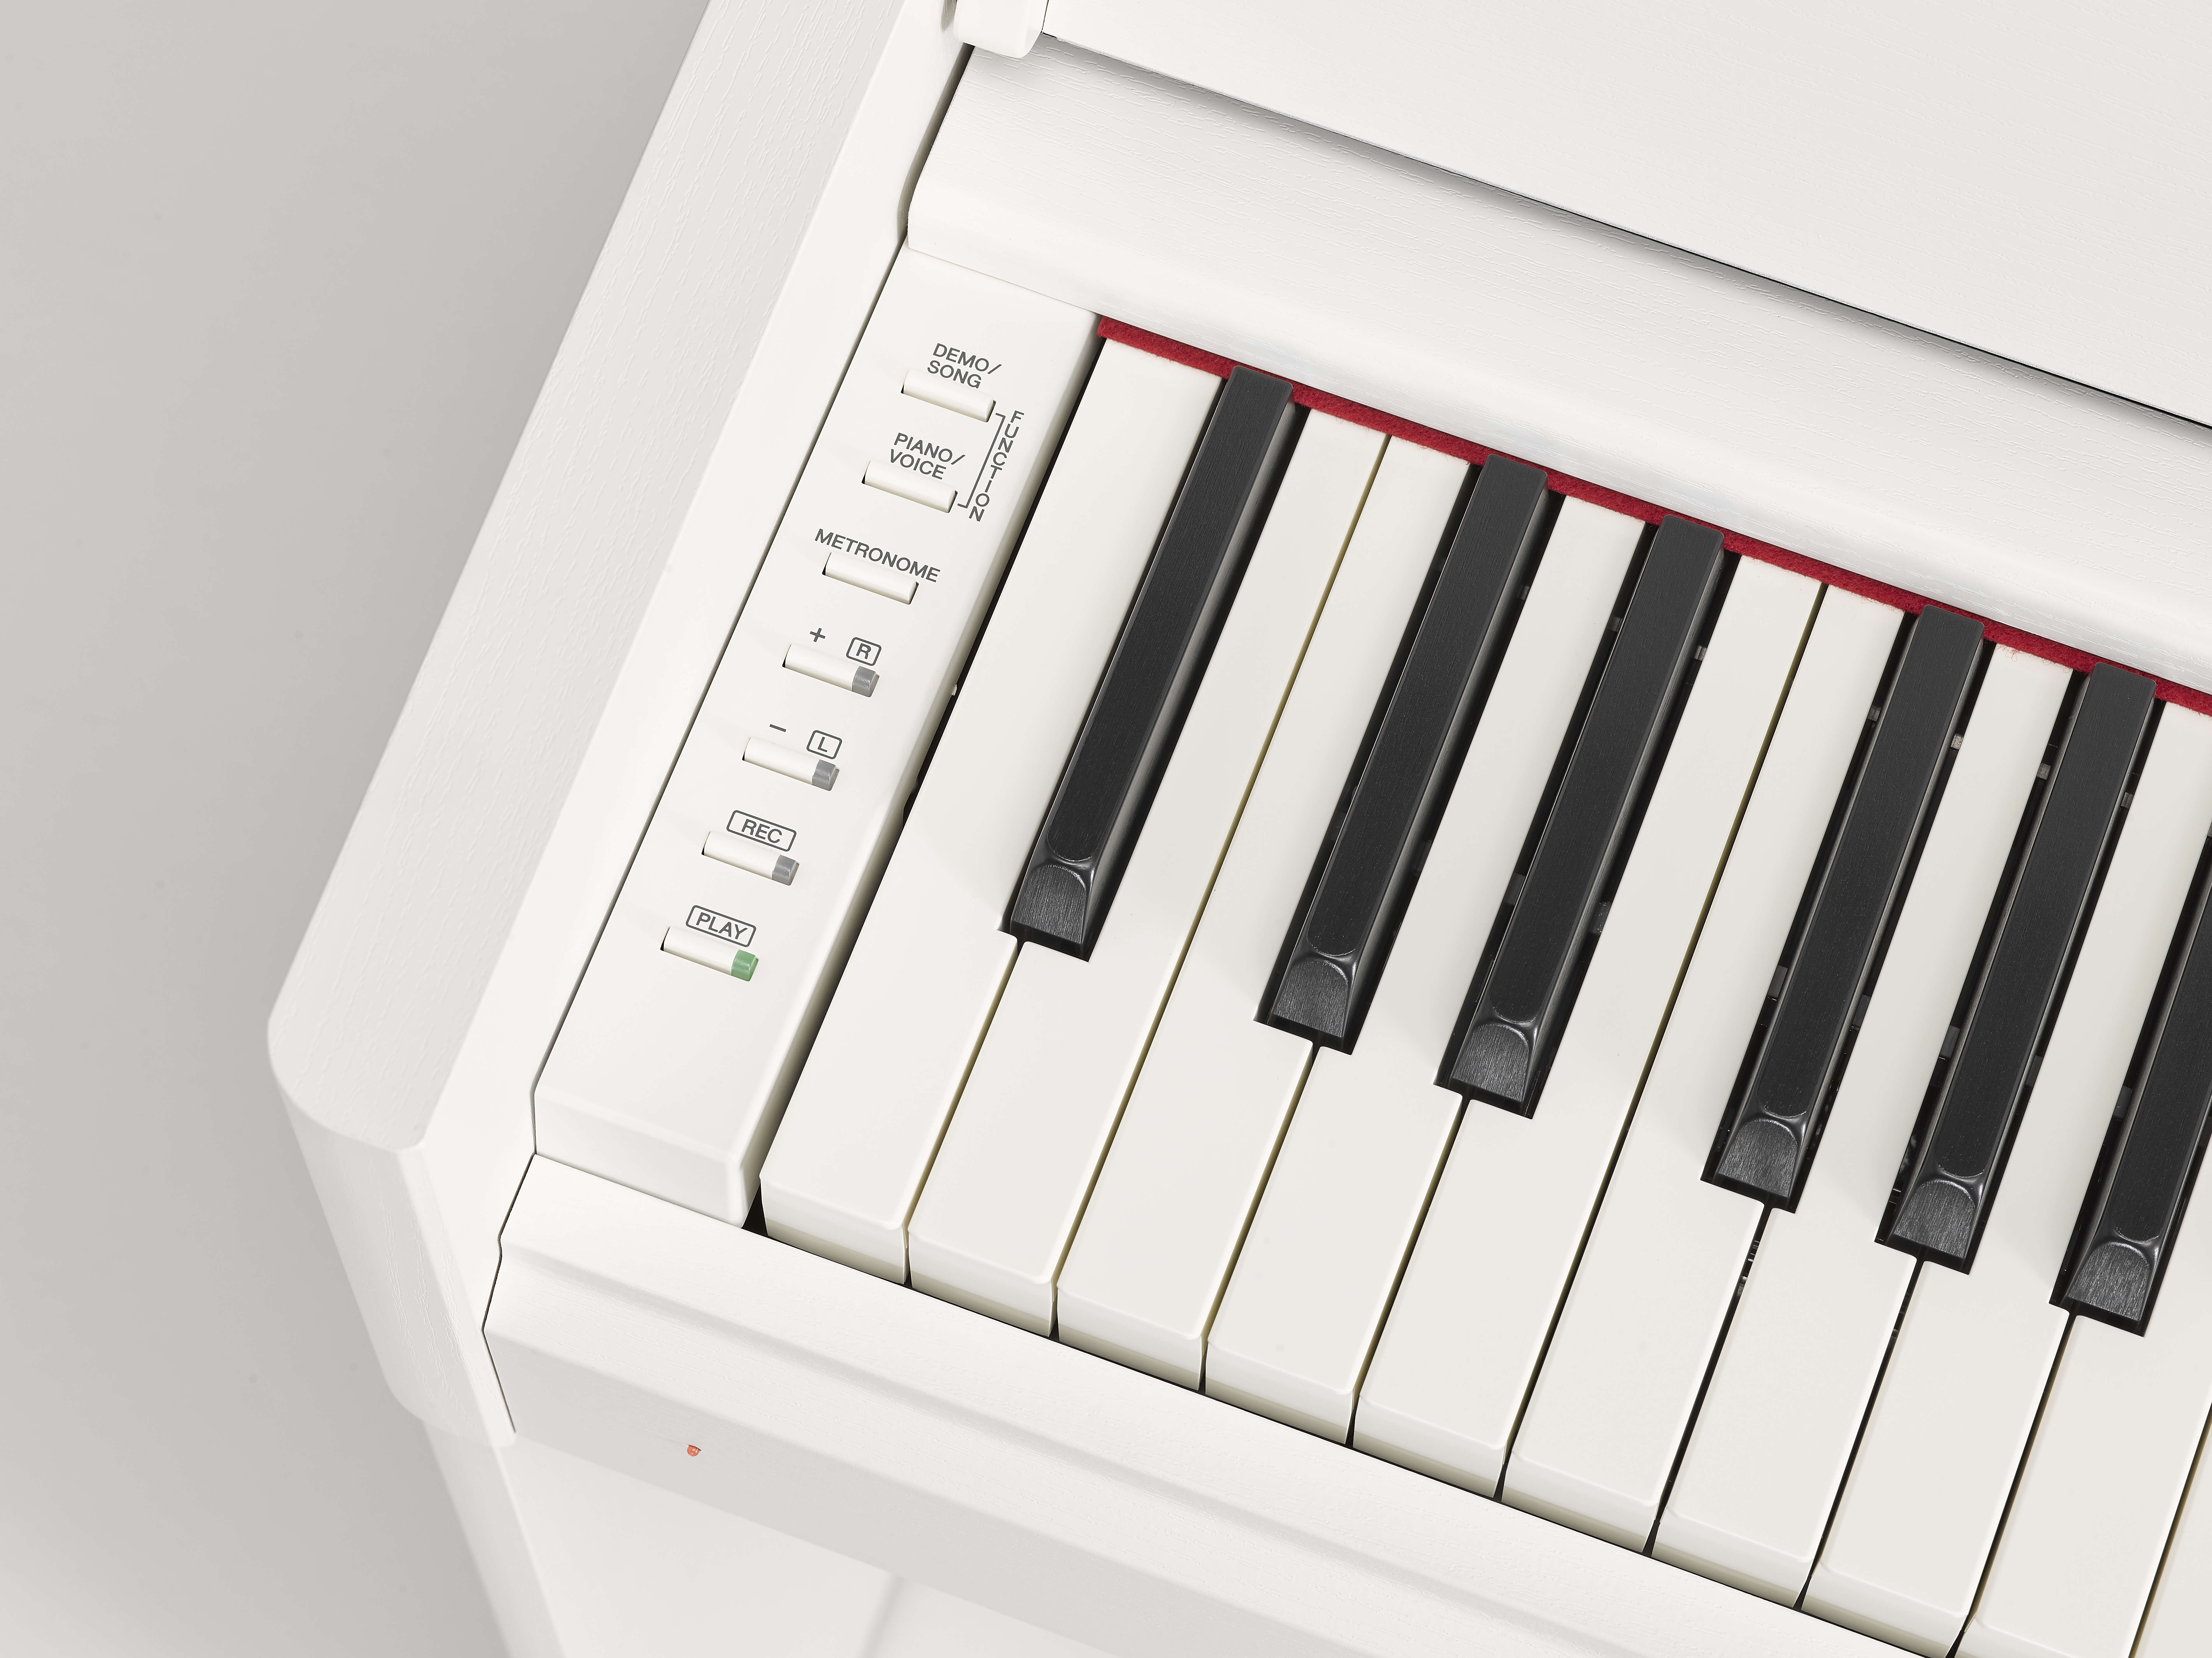 Yamaha Ydp-s54 - White - Digital piano with stand - Variation 4